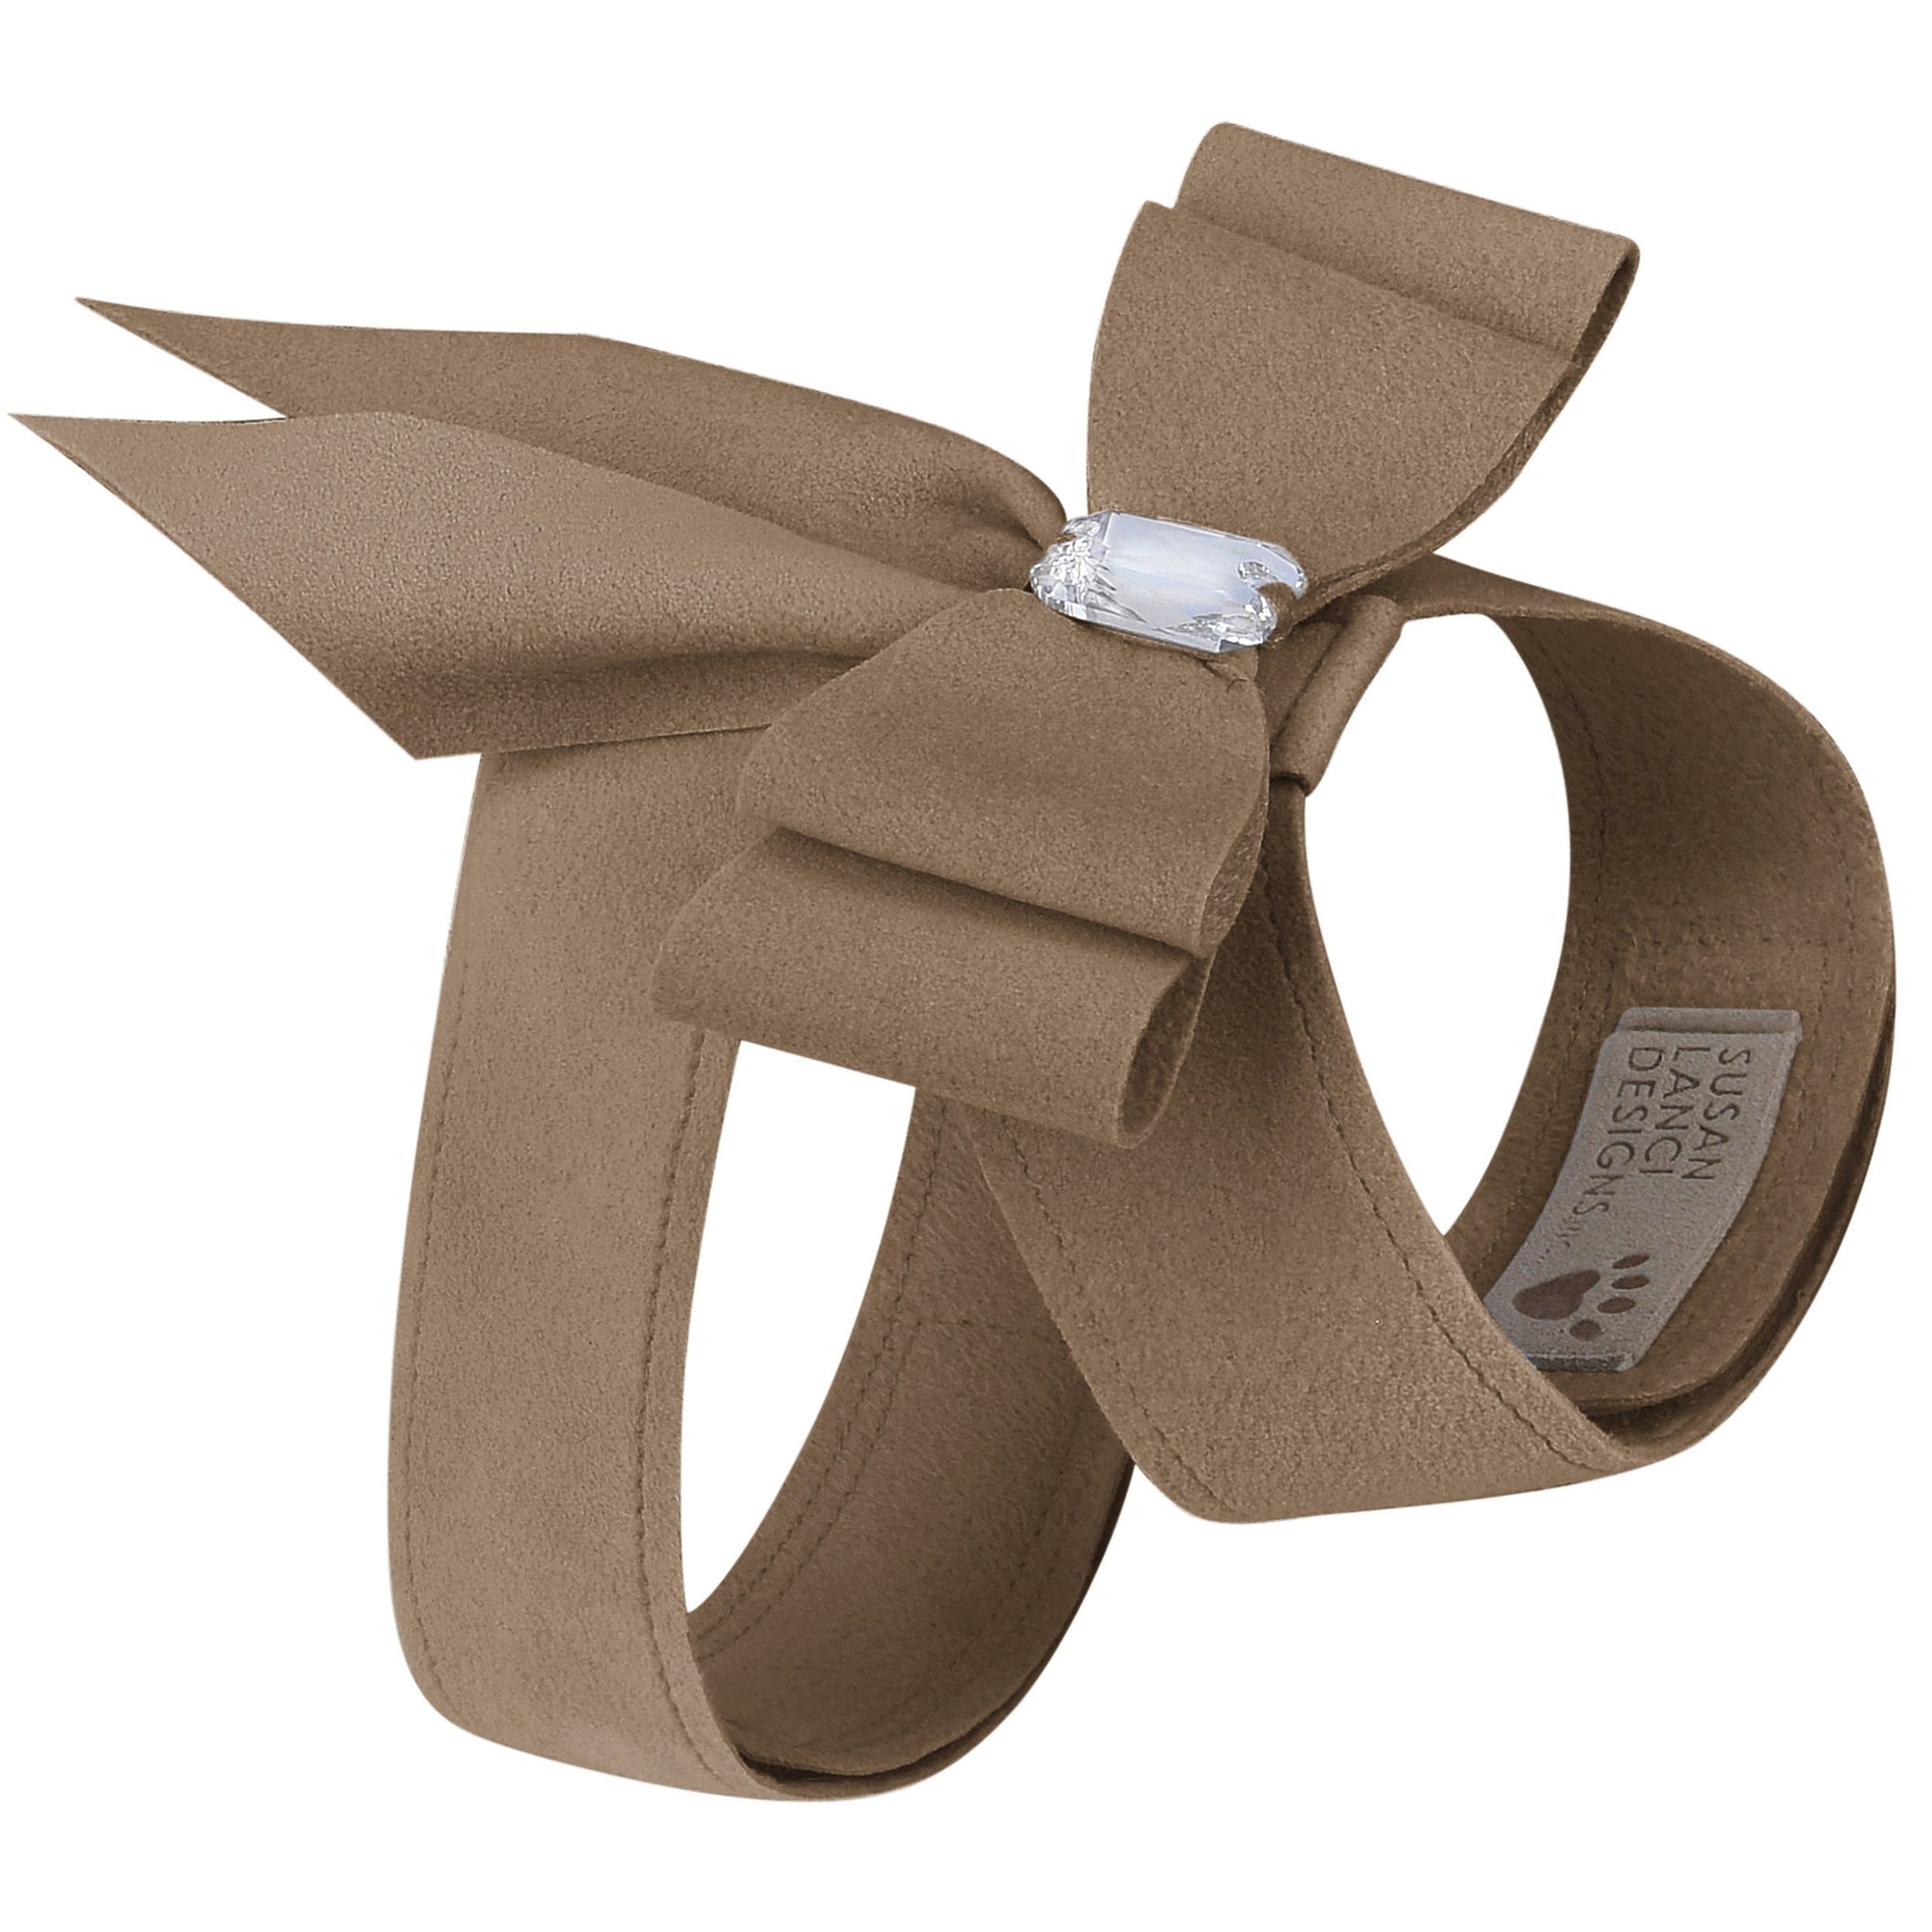 Double Tail Bow Tinkie Harness